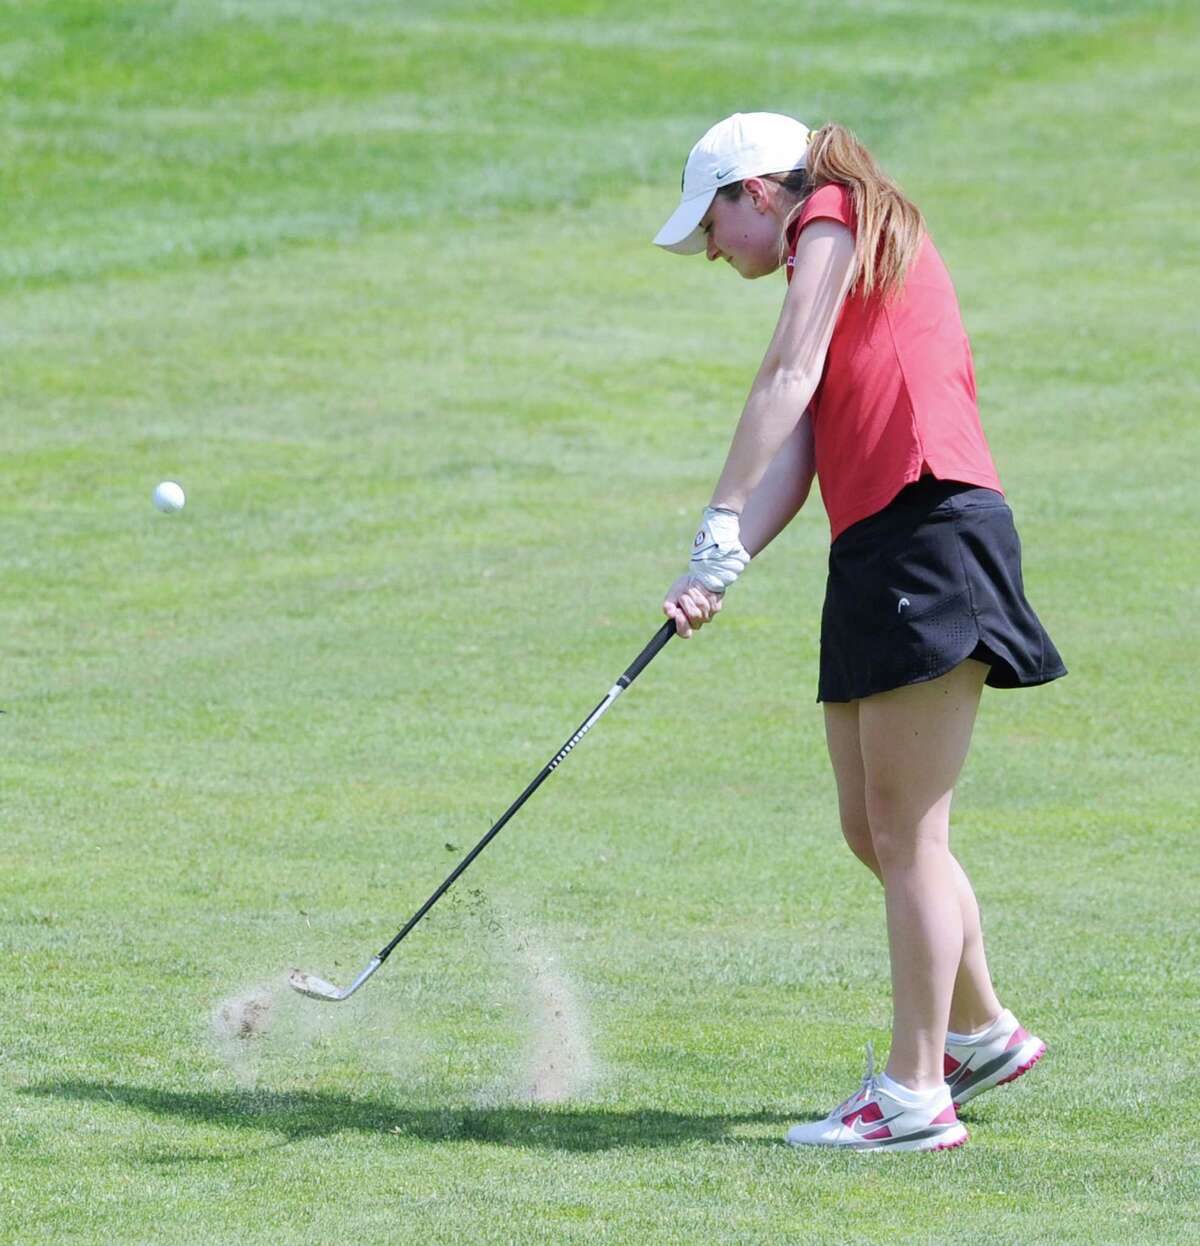 Greenwich’s Catherine McEvoy plays onto the first green during the Cardinals’ match between against New Canaan Thursday at the Milbrook Club in Greenwich. McEvoy led Greenwich to a win with a 1-over-par 37 score.